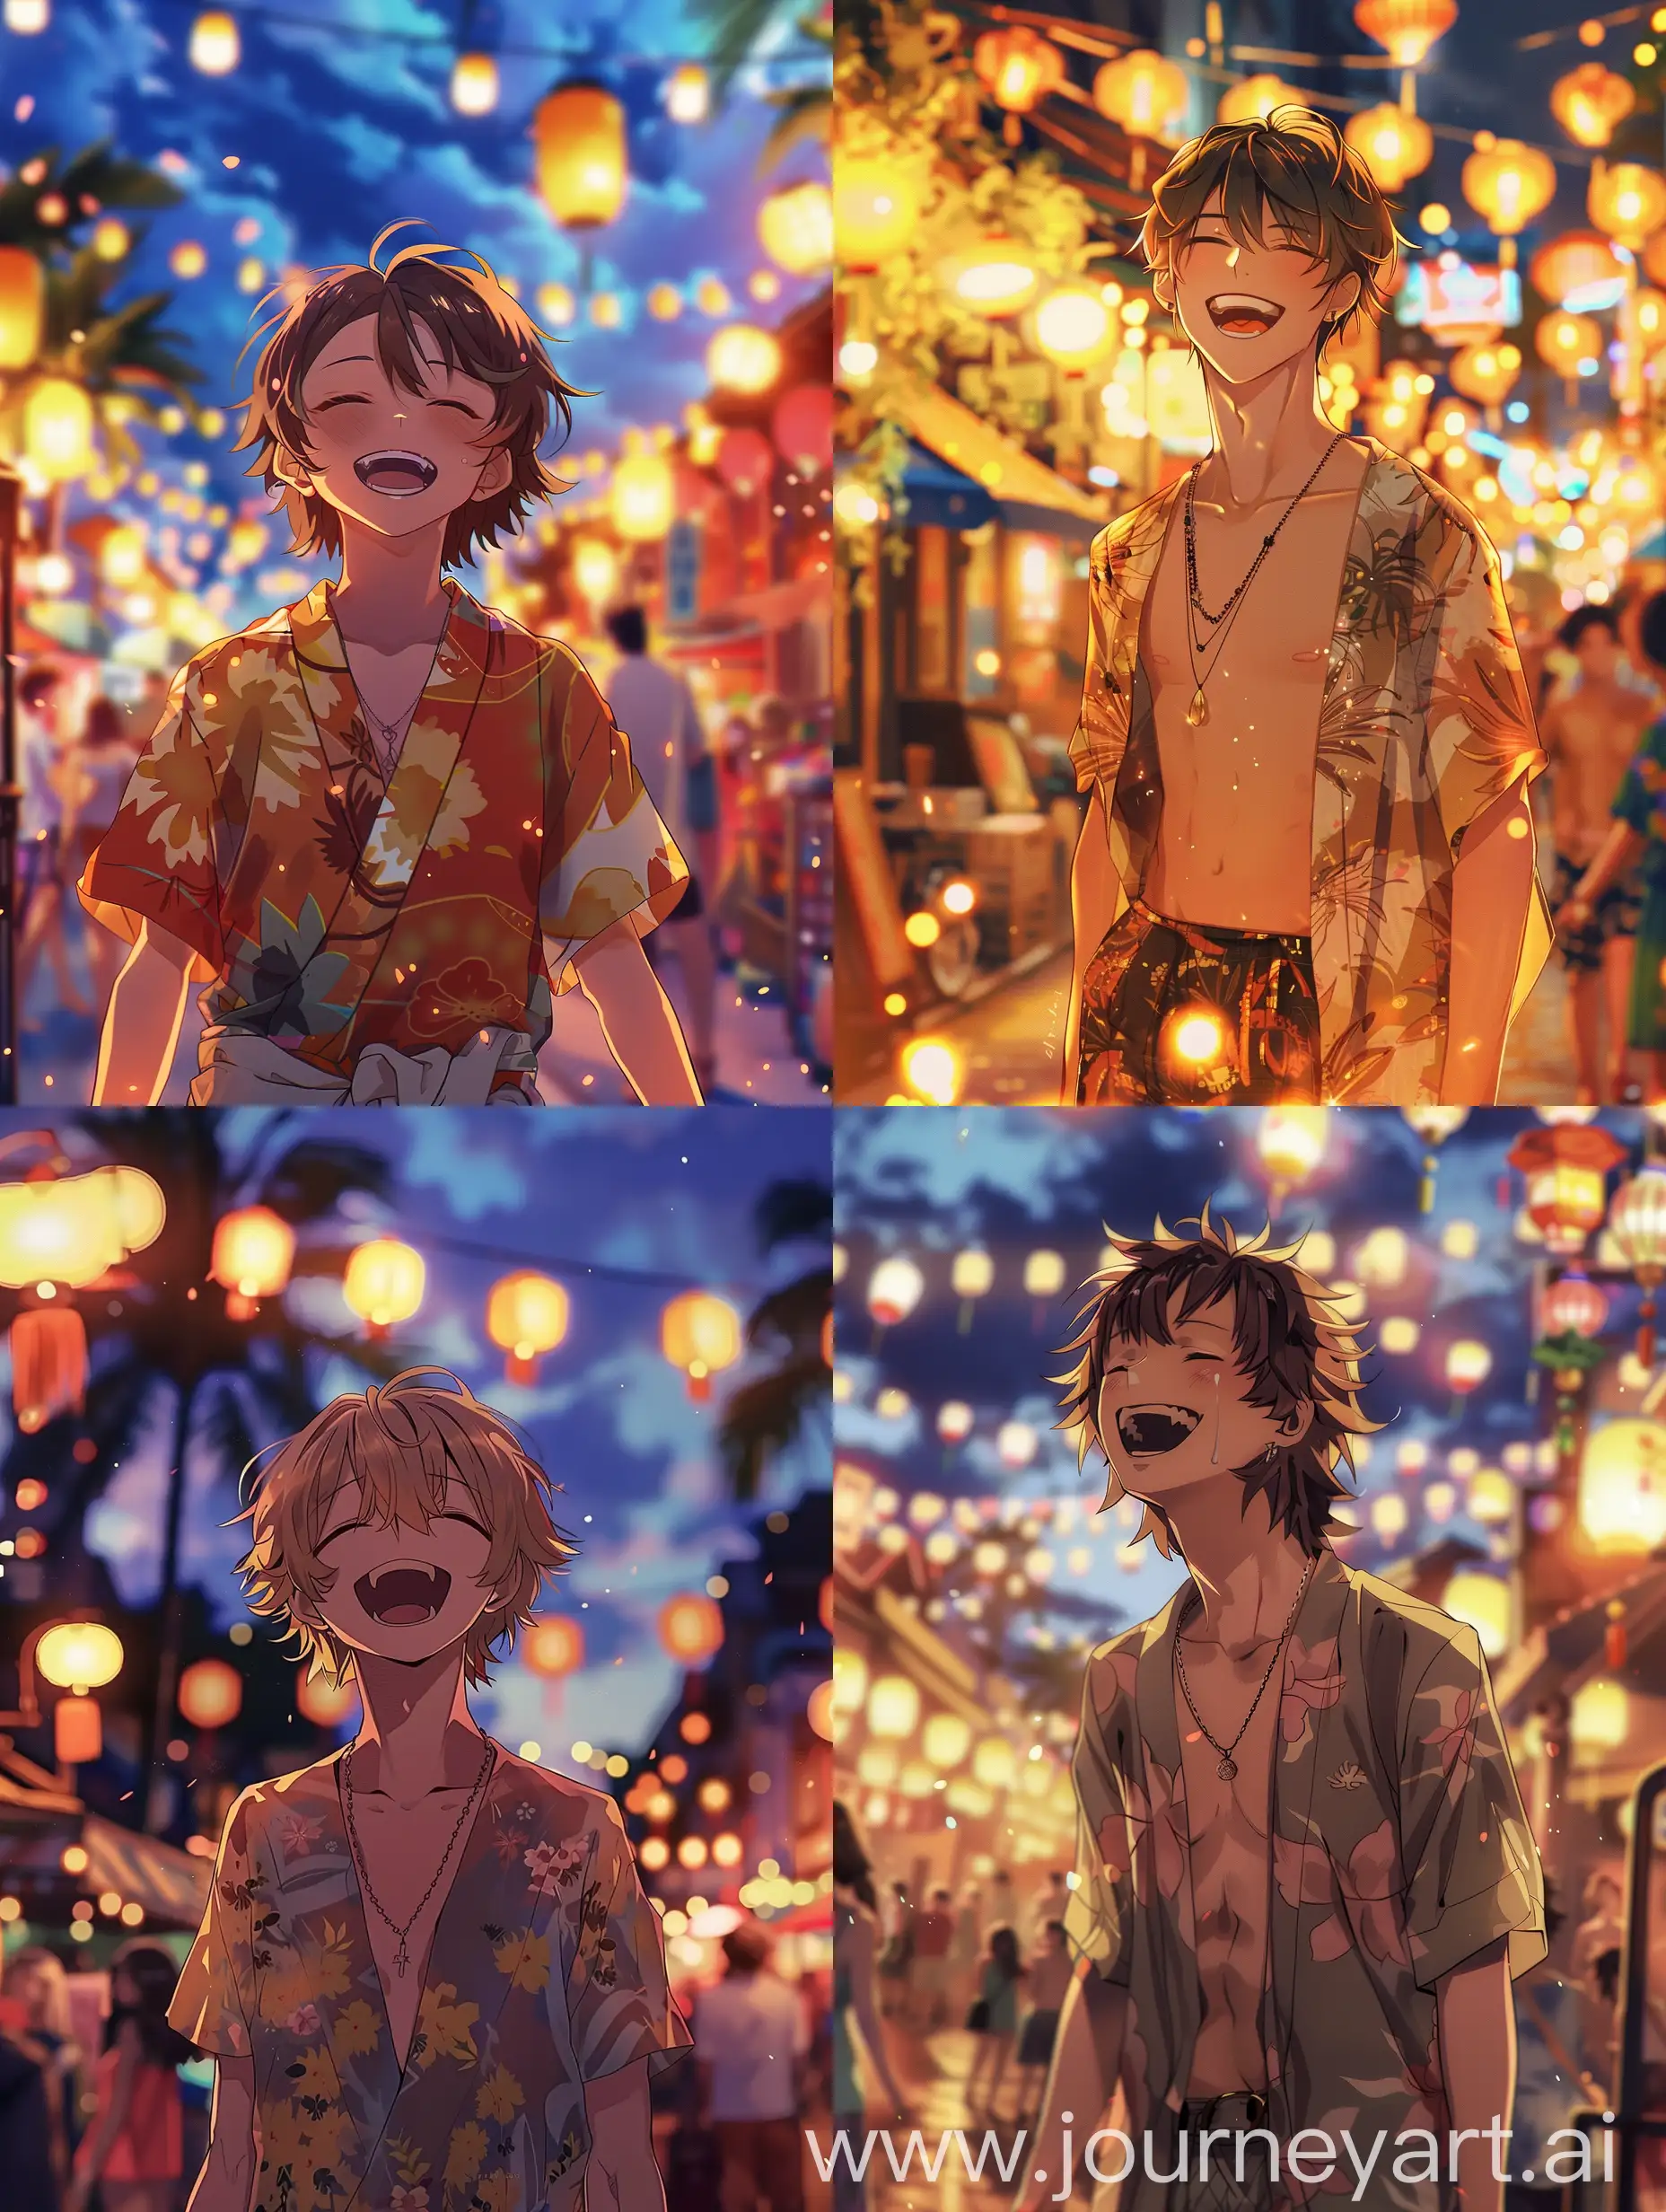 Youthful-Male-Anime-Character-in-Festive-Attire-Amidst-Illuminated-Street-Lights